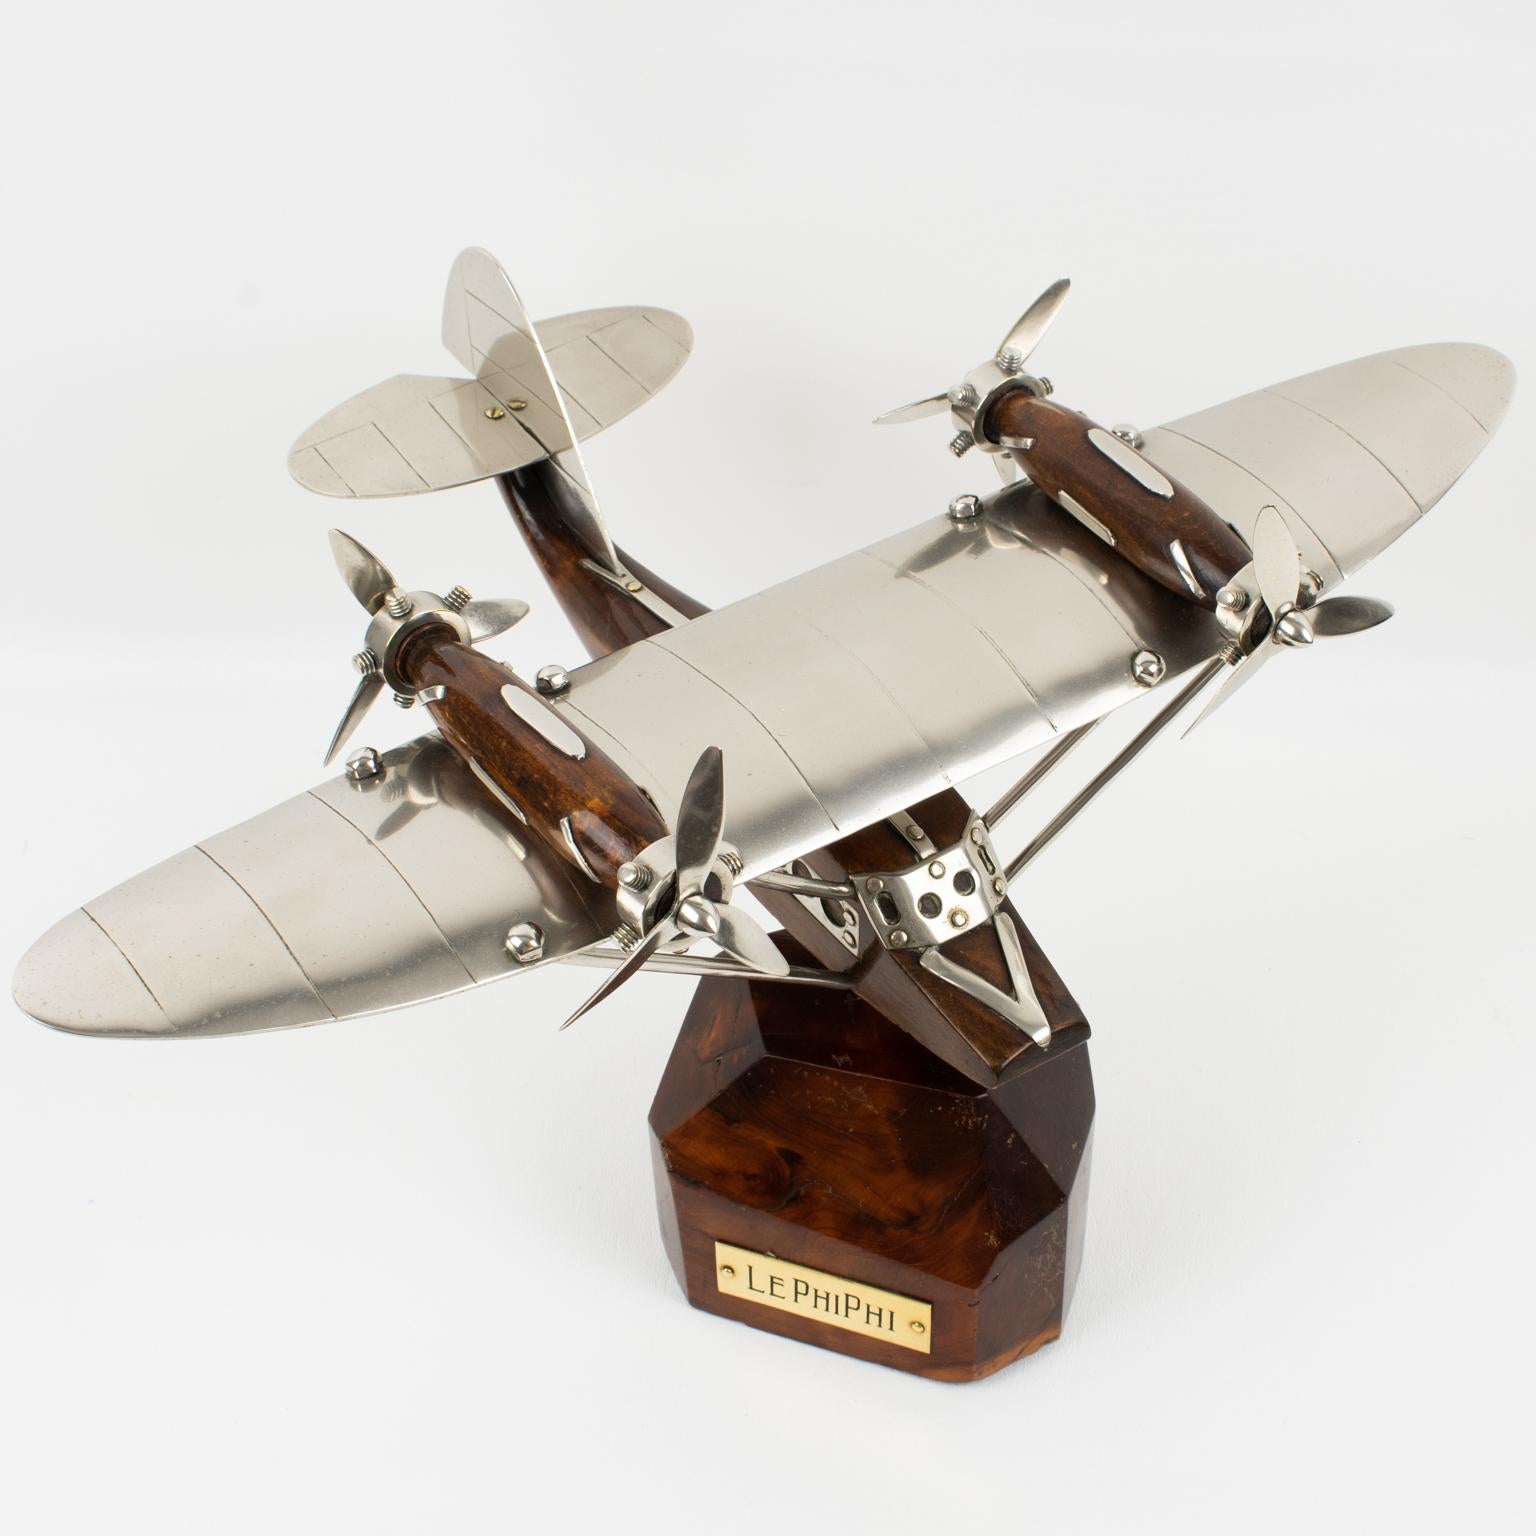 French Art Deco Wood and Chrome Airplane SeaPlane Aviation Model, 1940s For Sale 3